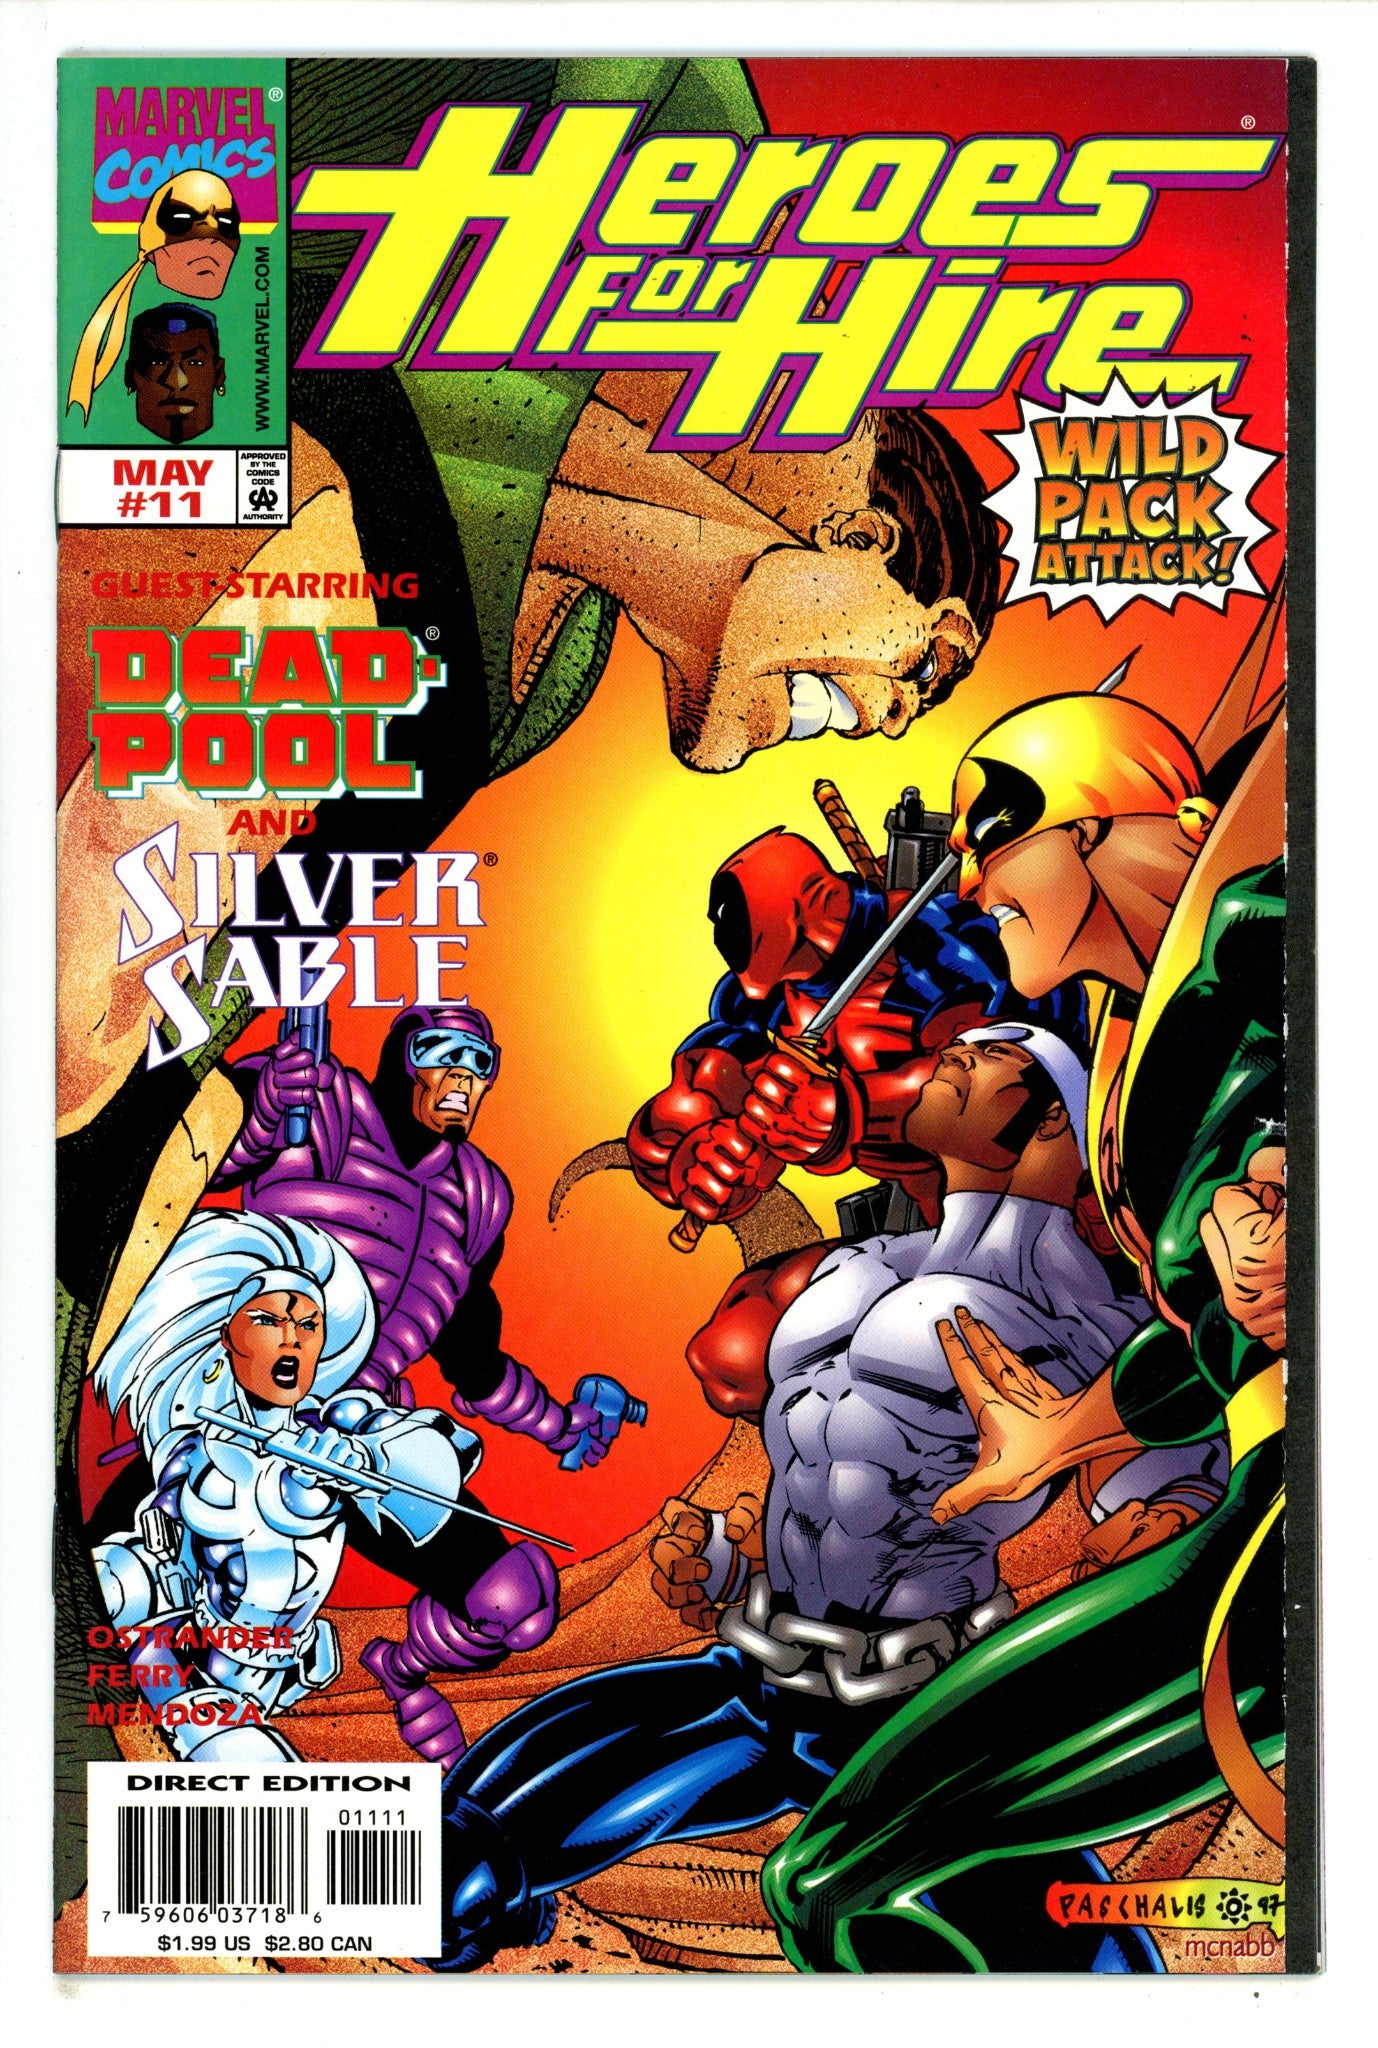 Heroes for Hire Vol 1 11 NM (9.4) (1998)